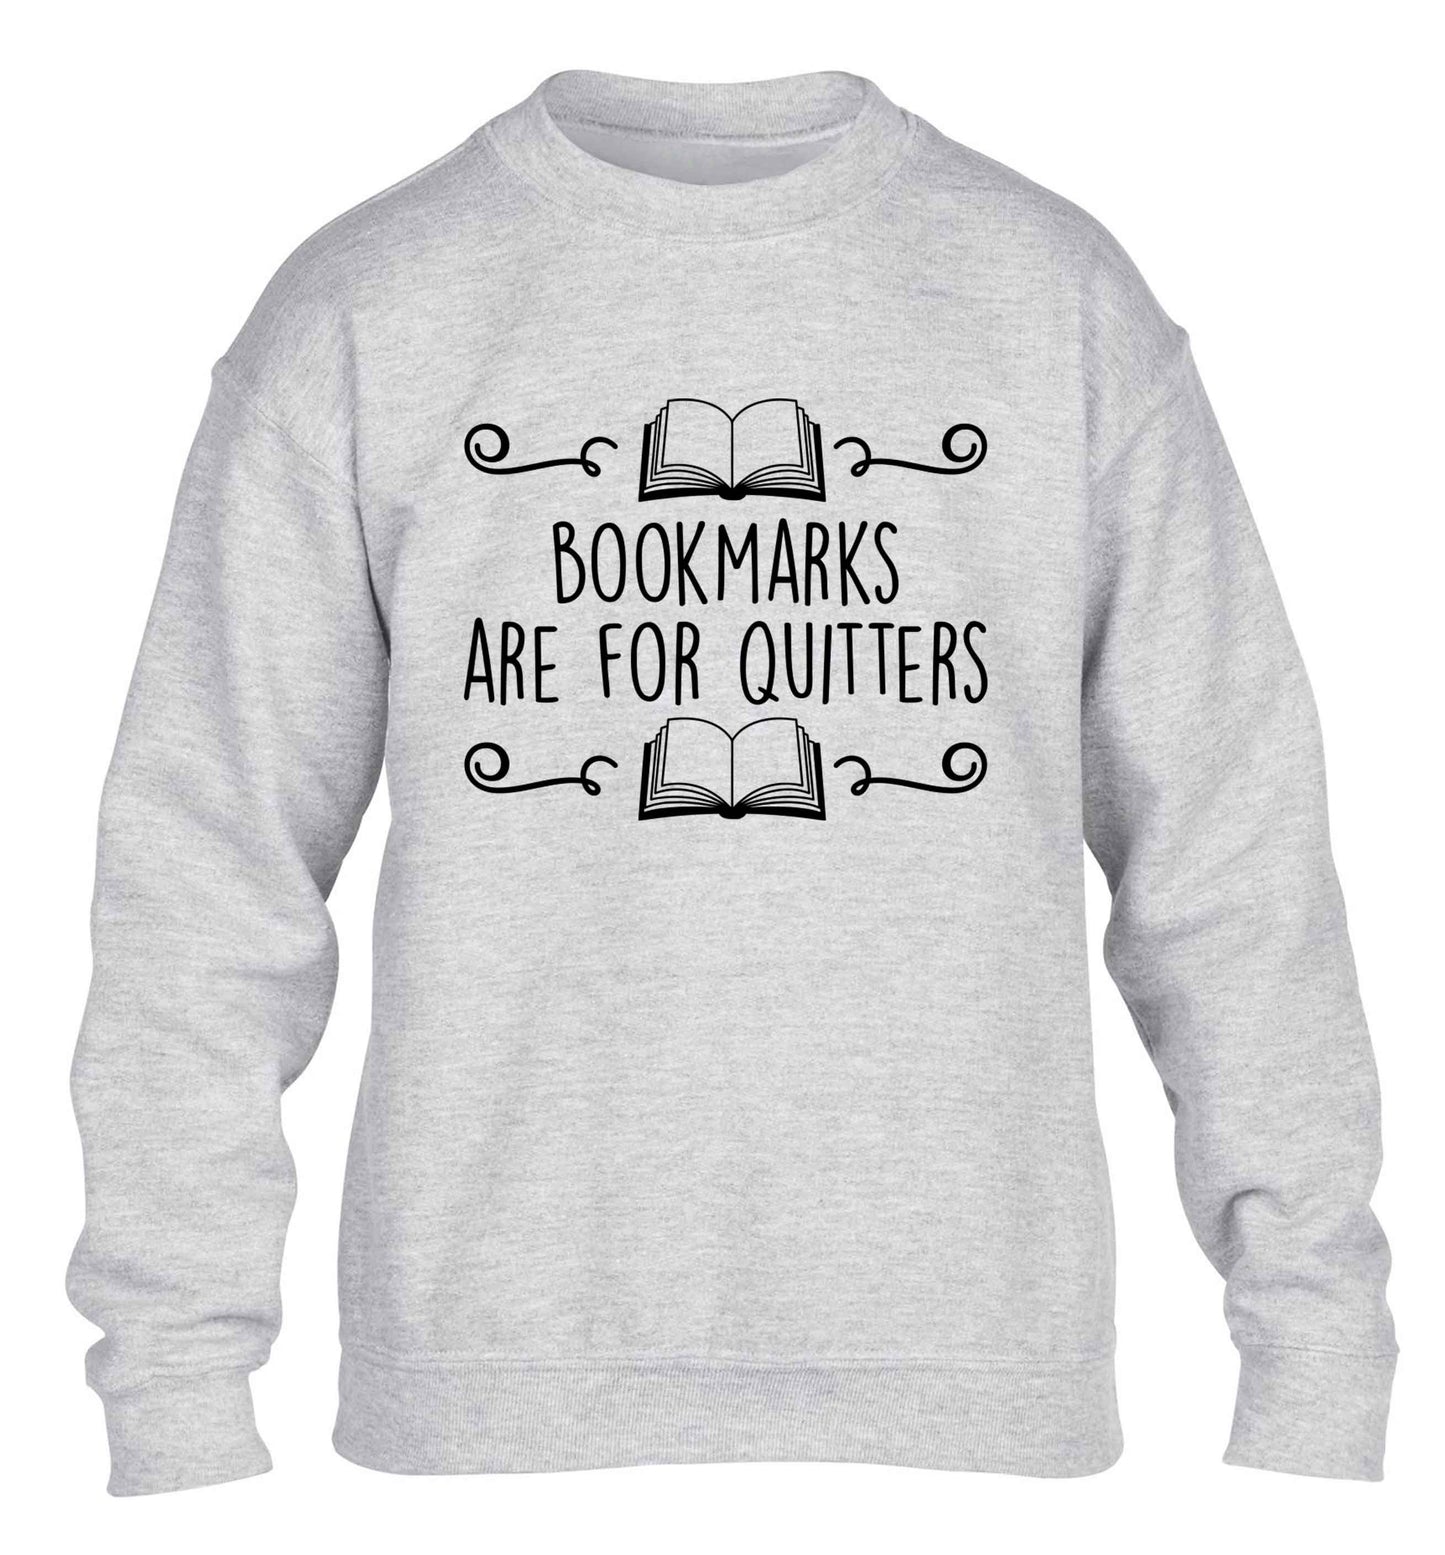 Bookmarks are for quitters children's grey sweater 12-13 Years